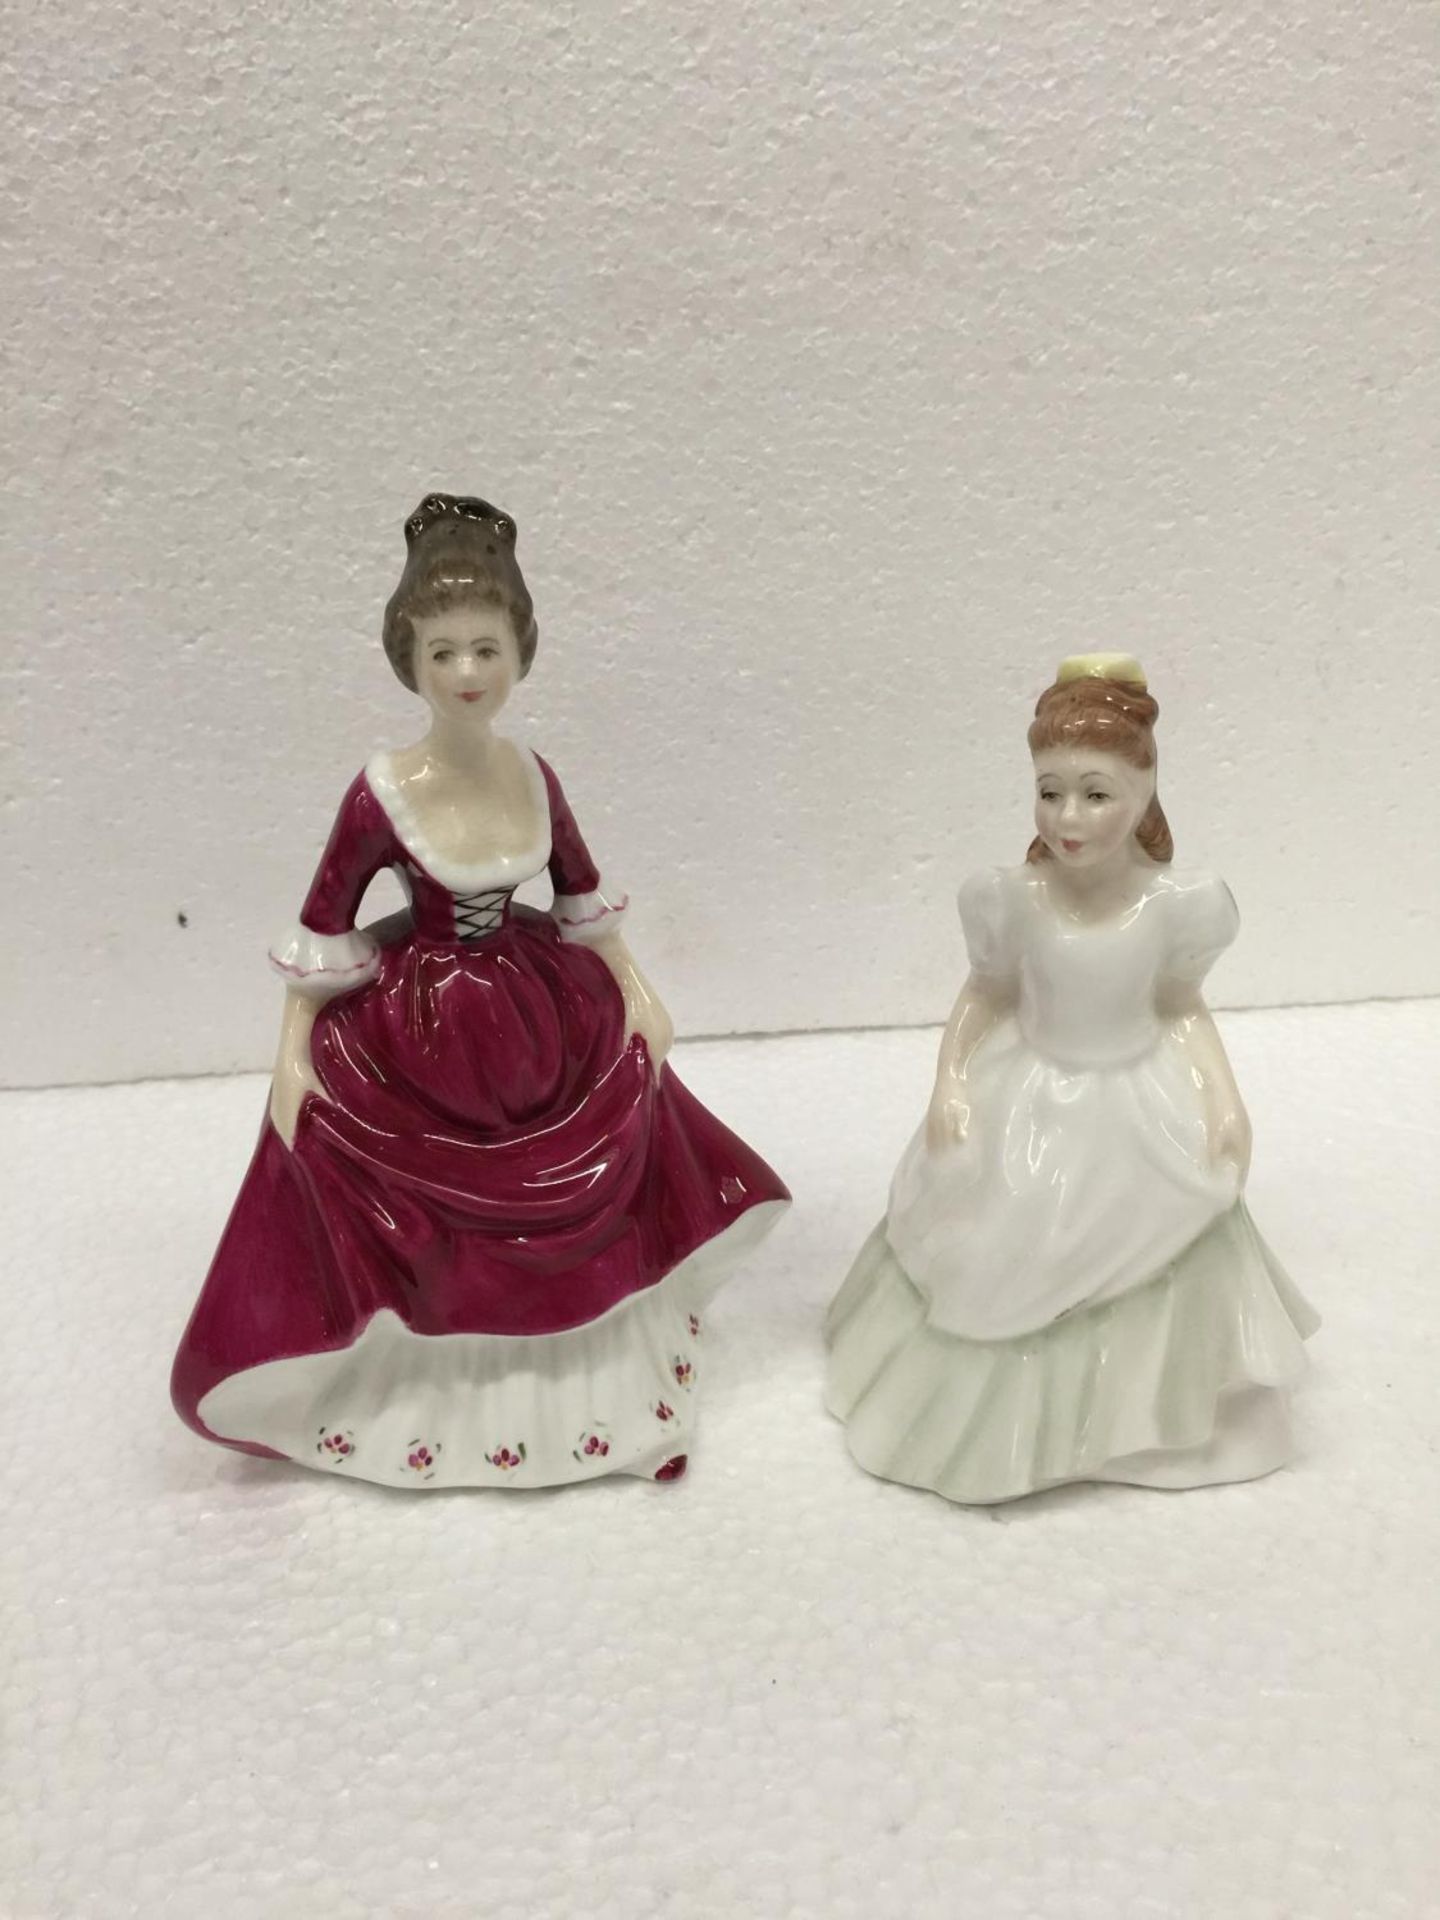 A ROYAL DOULTON SMALL FIGURINE "KERRY" 13 CM TOGETHER WITH A FURTHER FINE BONE CHINA FIGURINE "CARA"